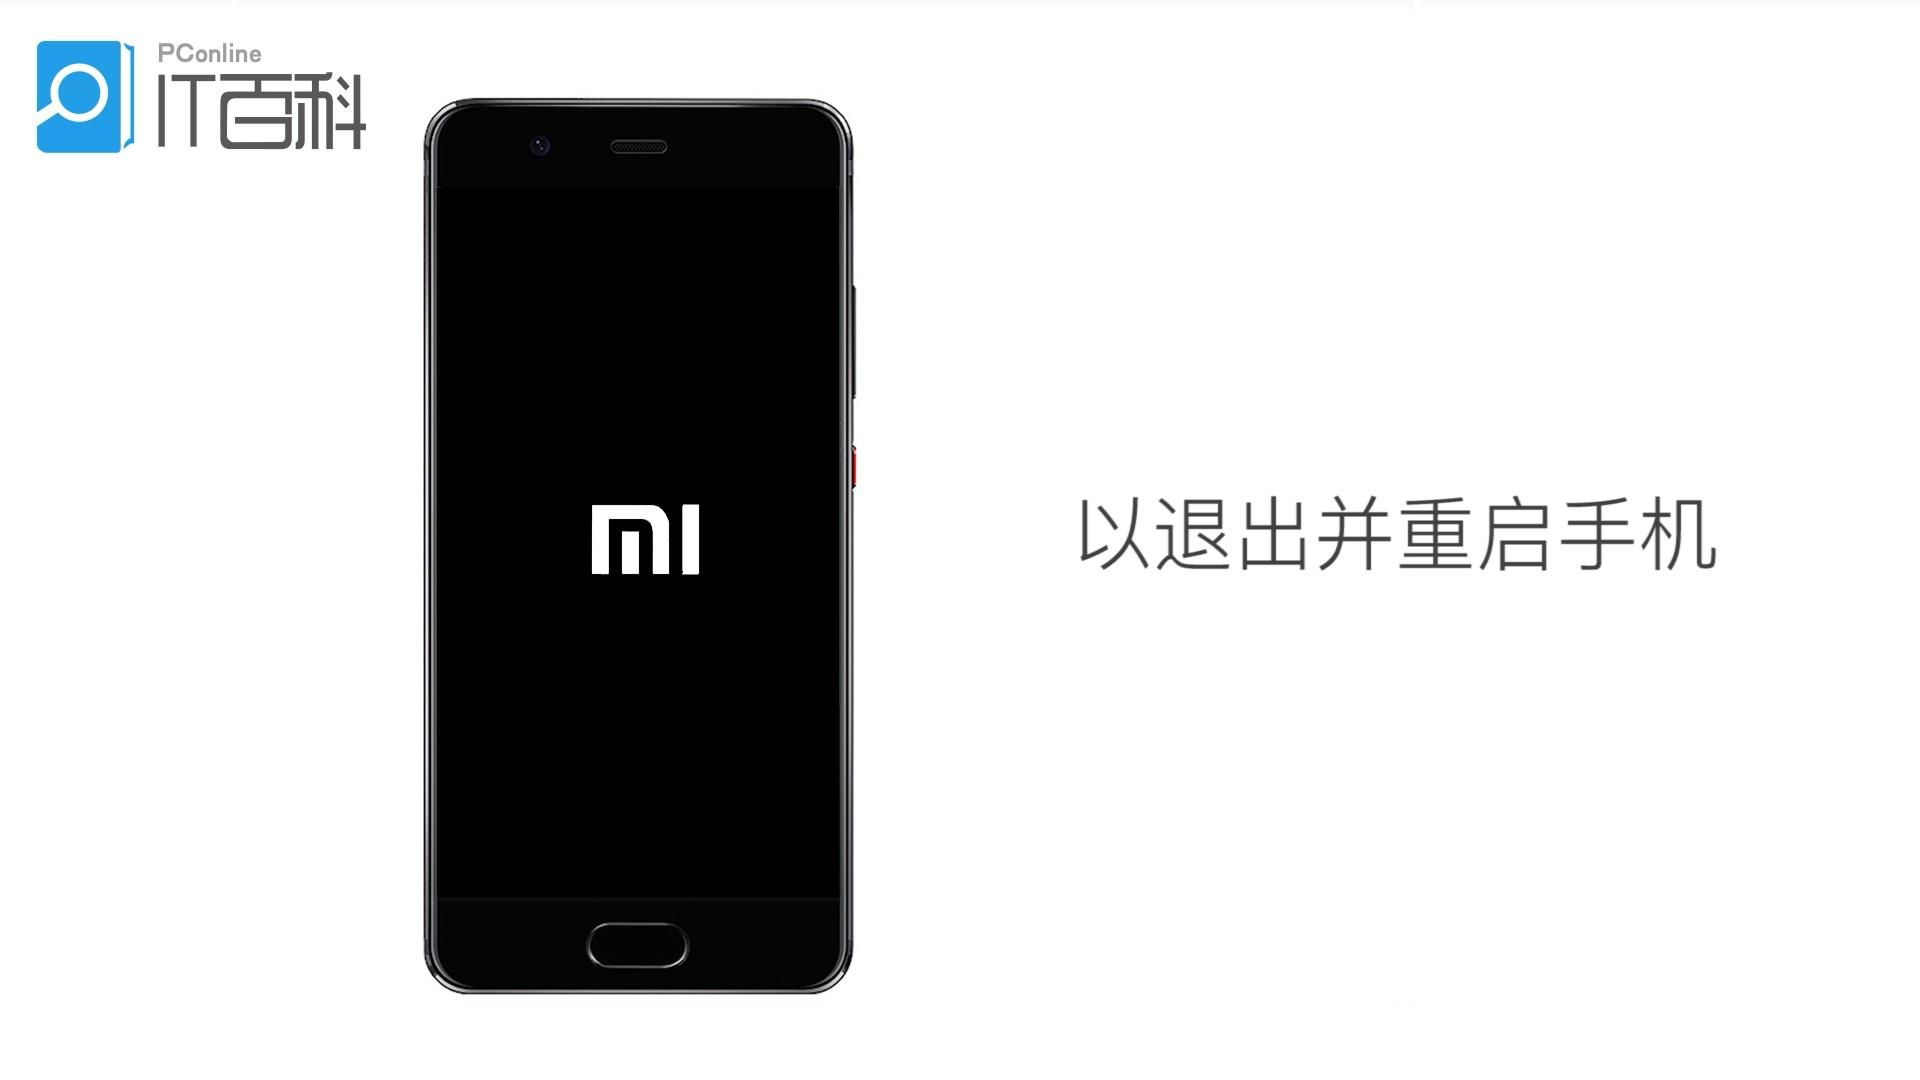 Fastboot in Xiaomi, Mi, Redmi phones: what is the meaning